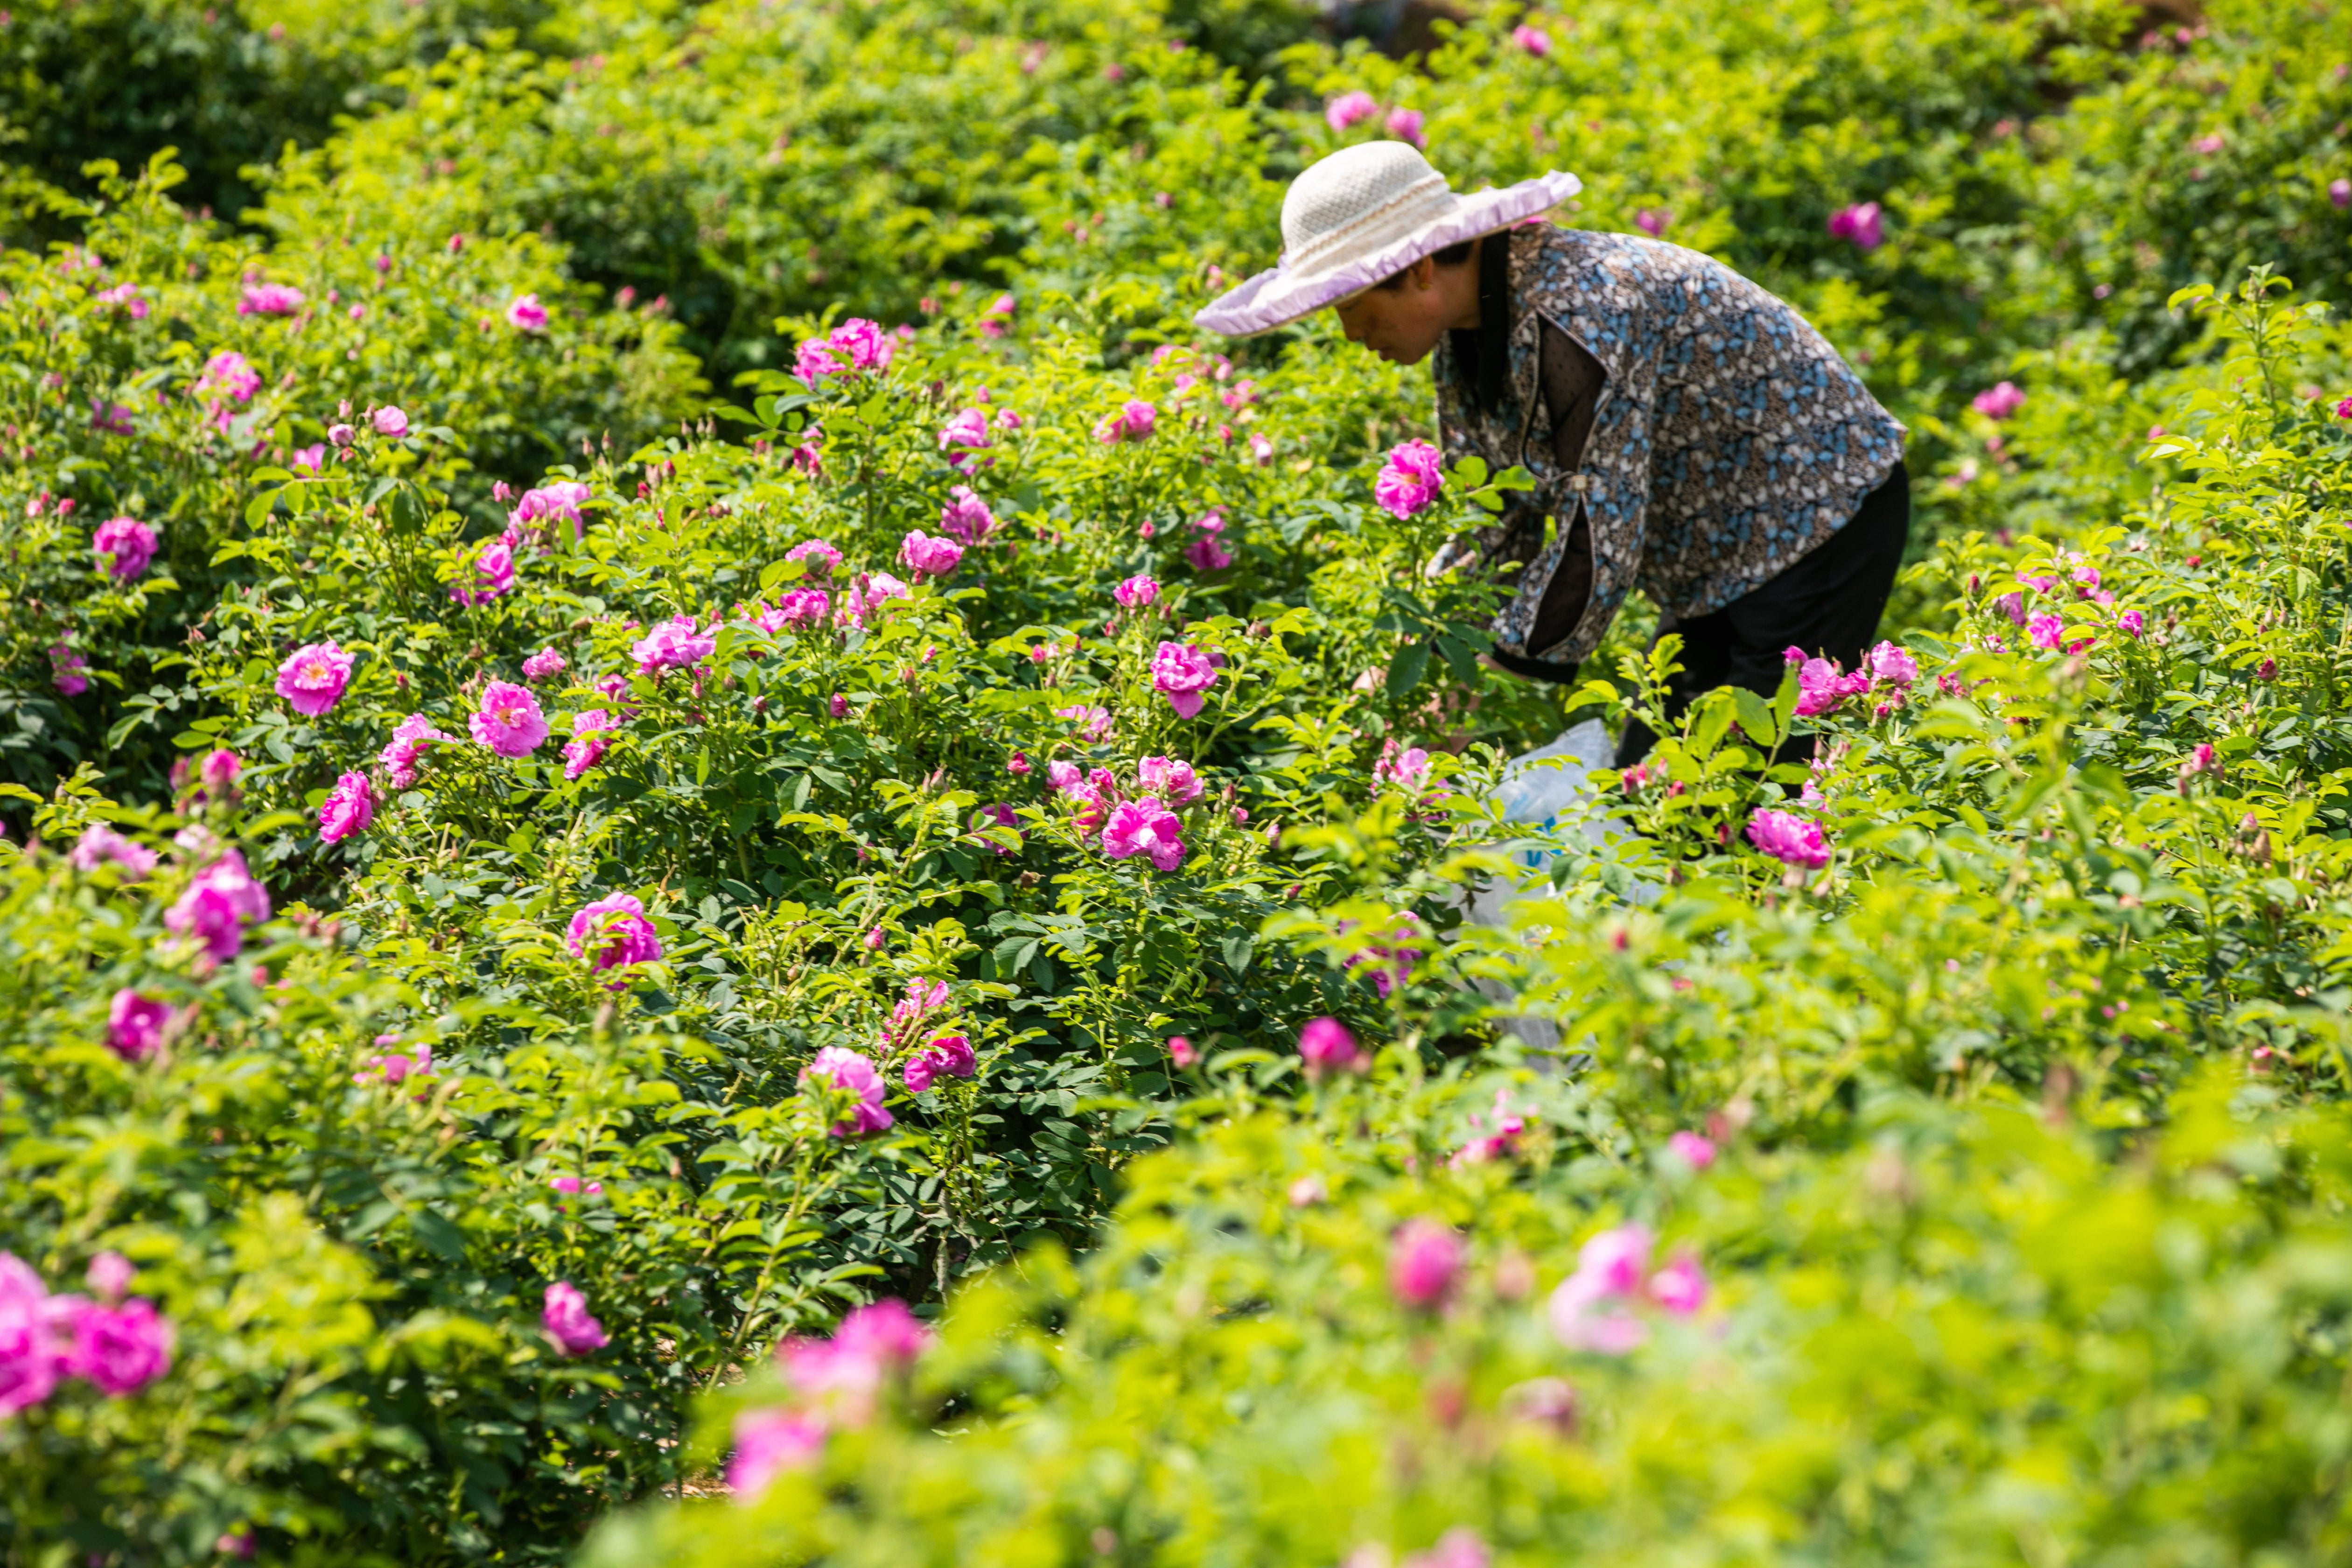 A farmer harvests edible roses on a plantation in Bijie, Guizhou province